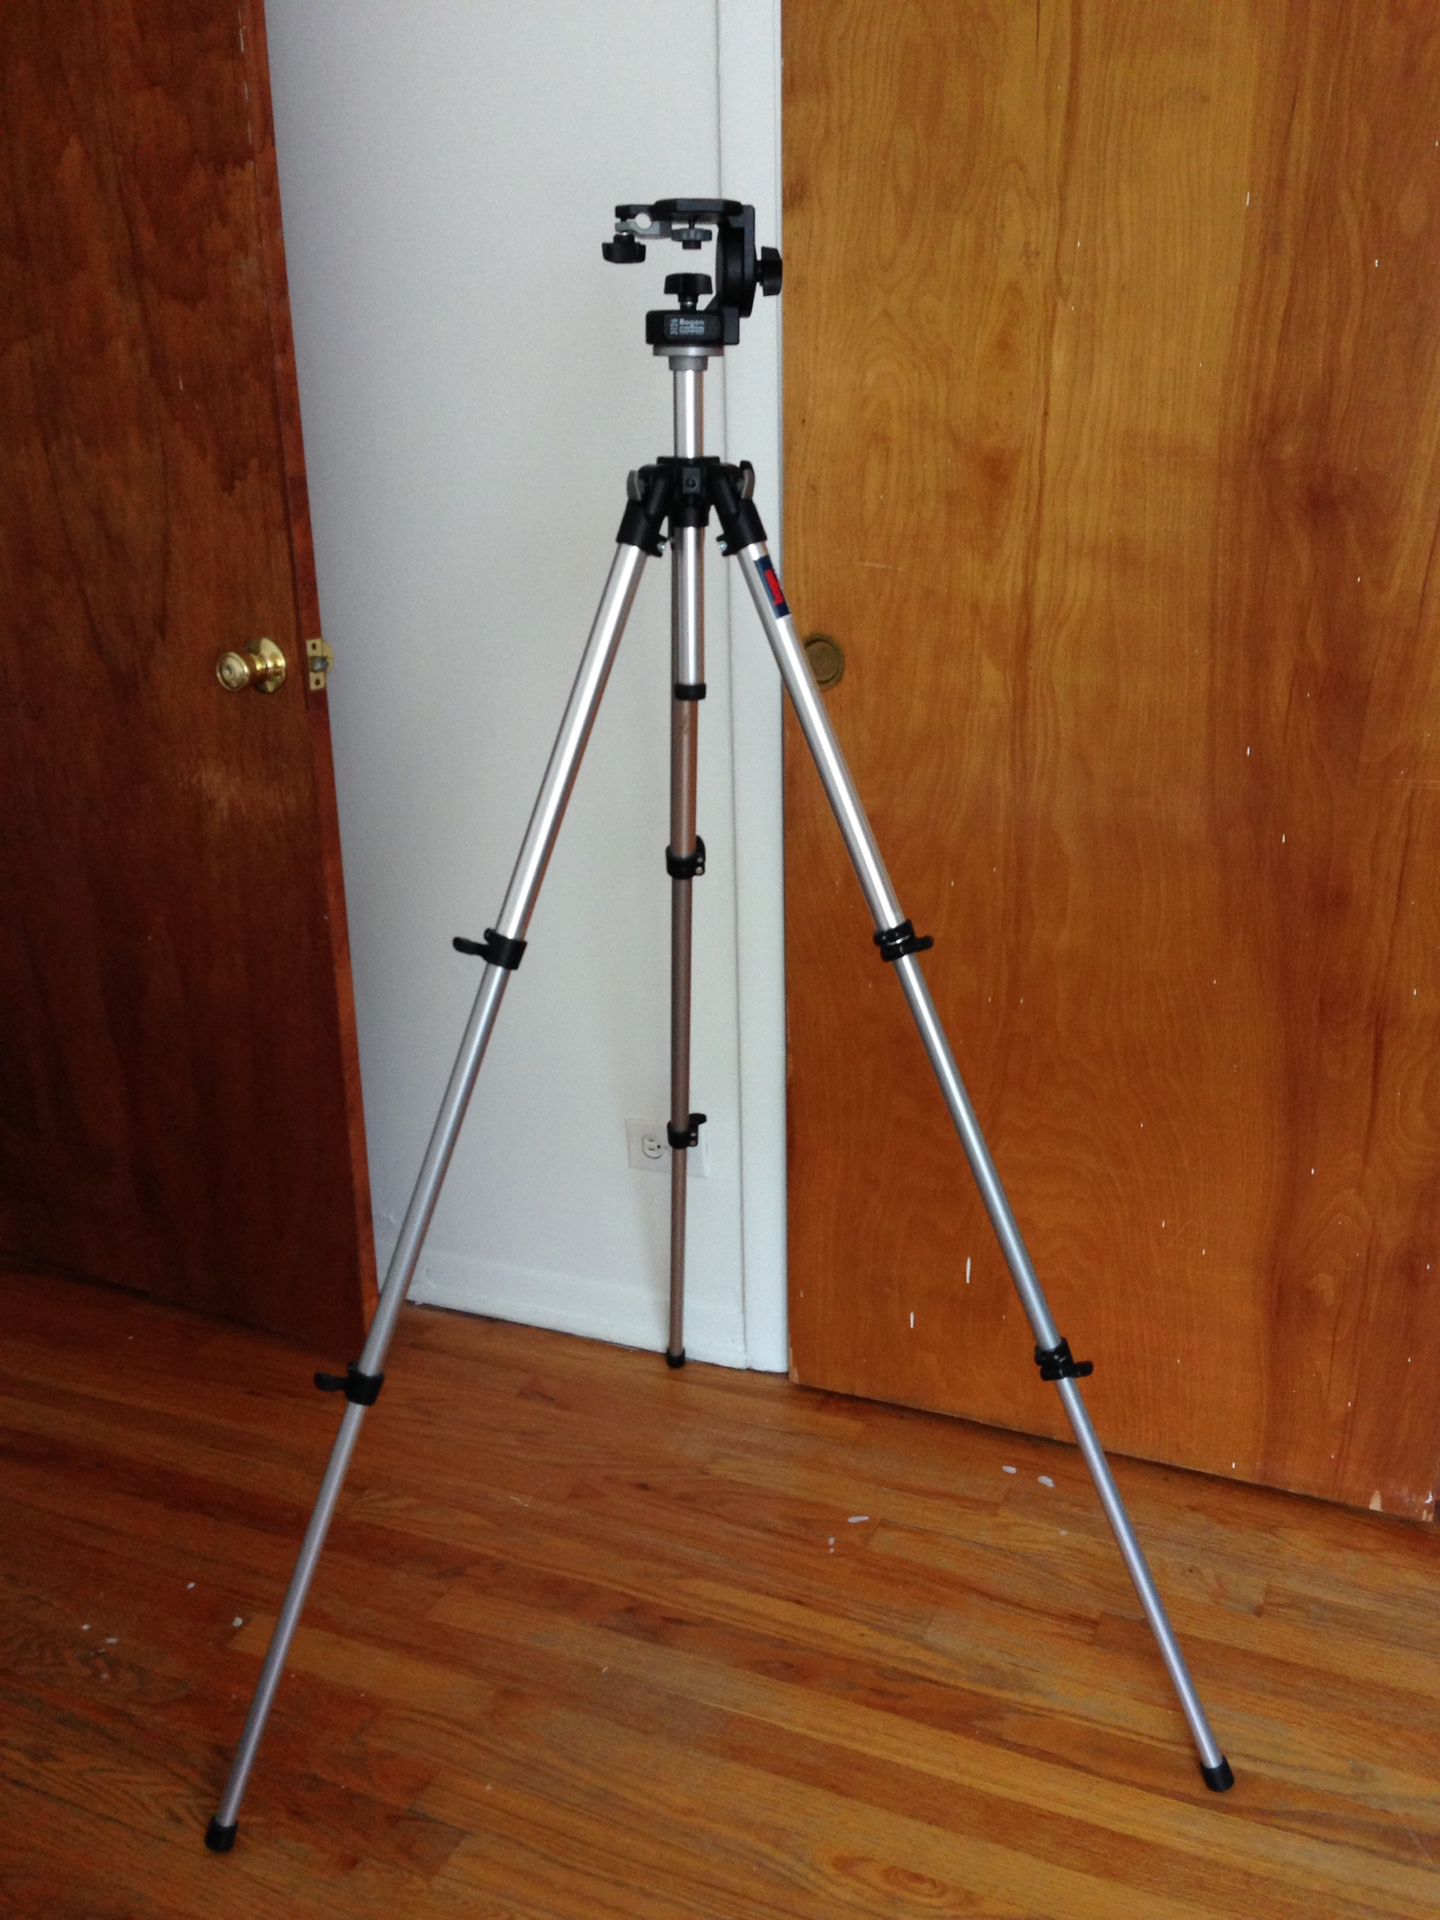 Bogen Manfrotto Tripod 3001 With 3126 Fluid Head $100